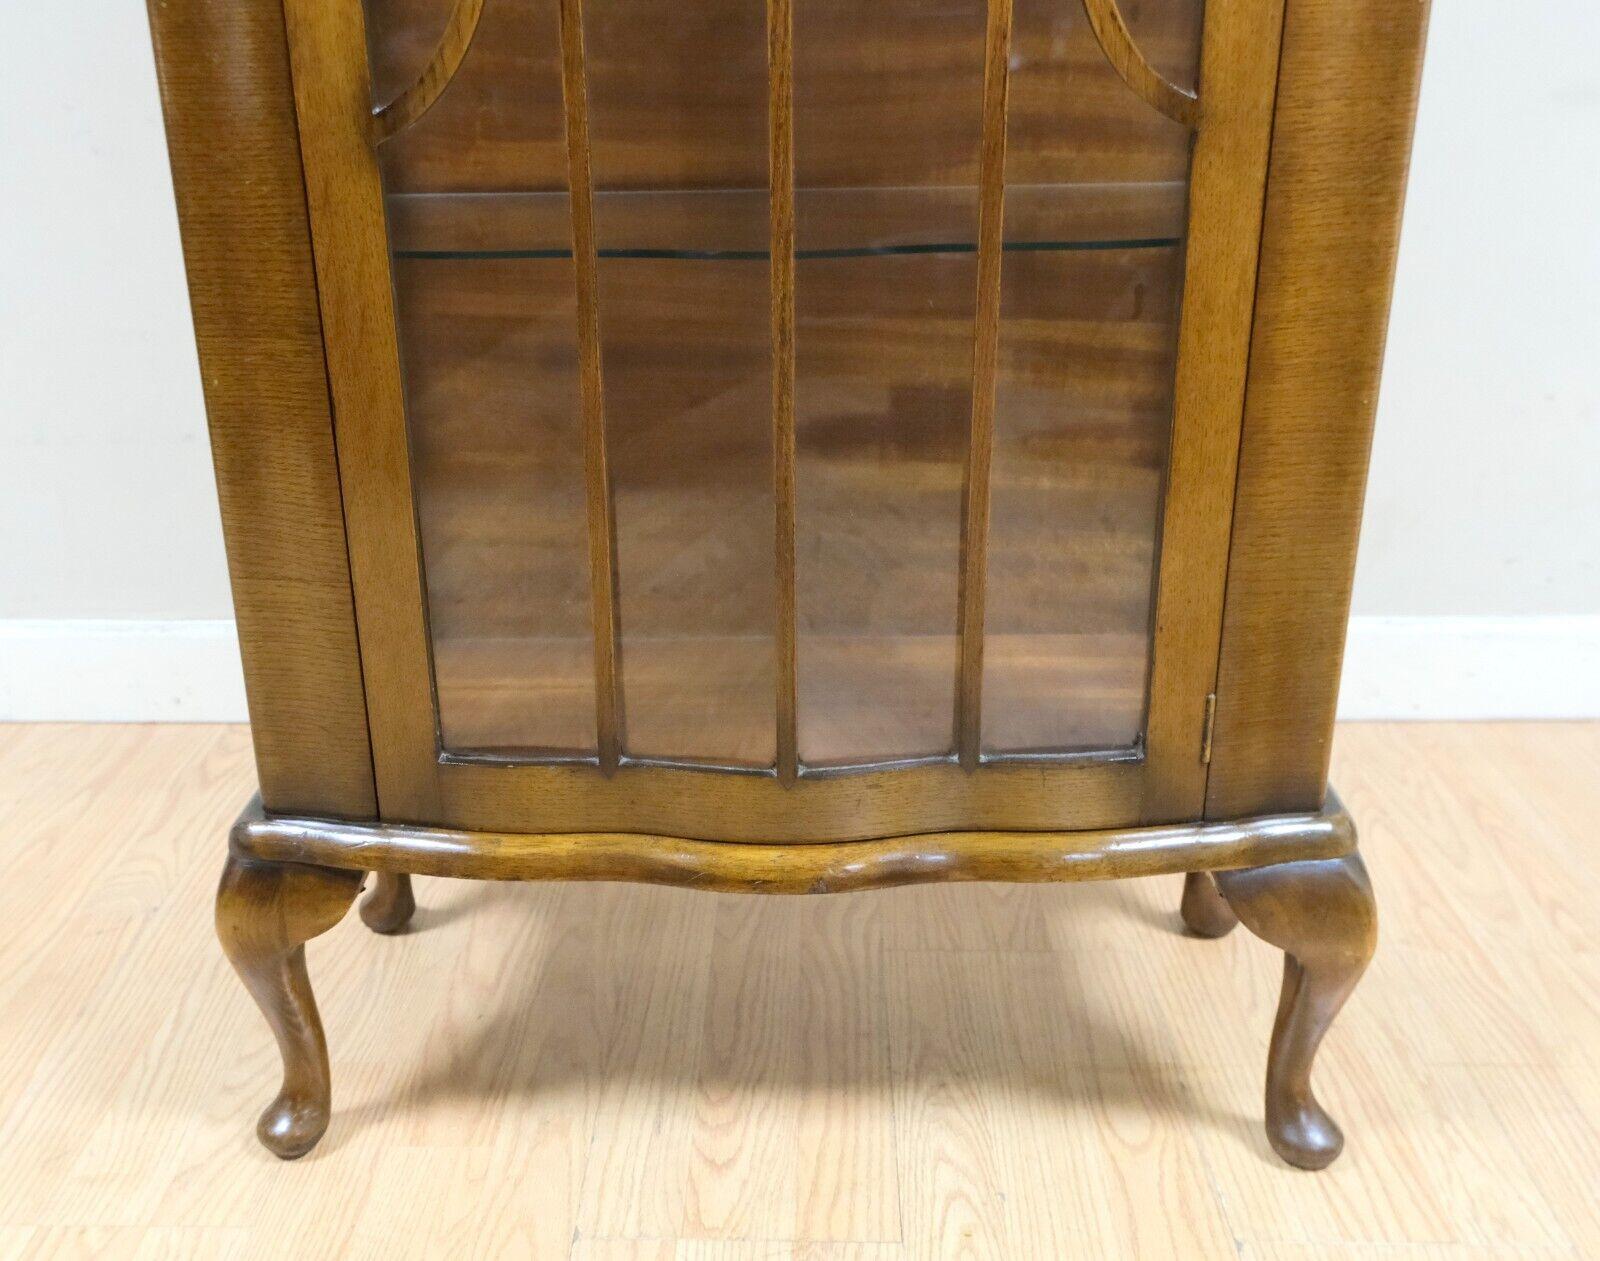 SMALL GORGEOUS WALNUT GLAZED BOOKCASE WiTH GLASS SHELVES ON QUEEN ANN STYLE LEGS For Sale 3